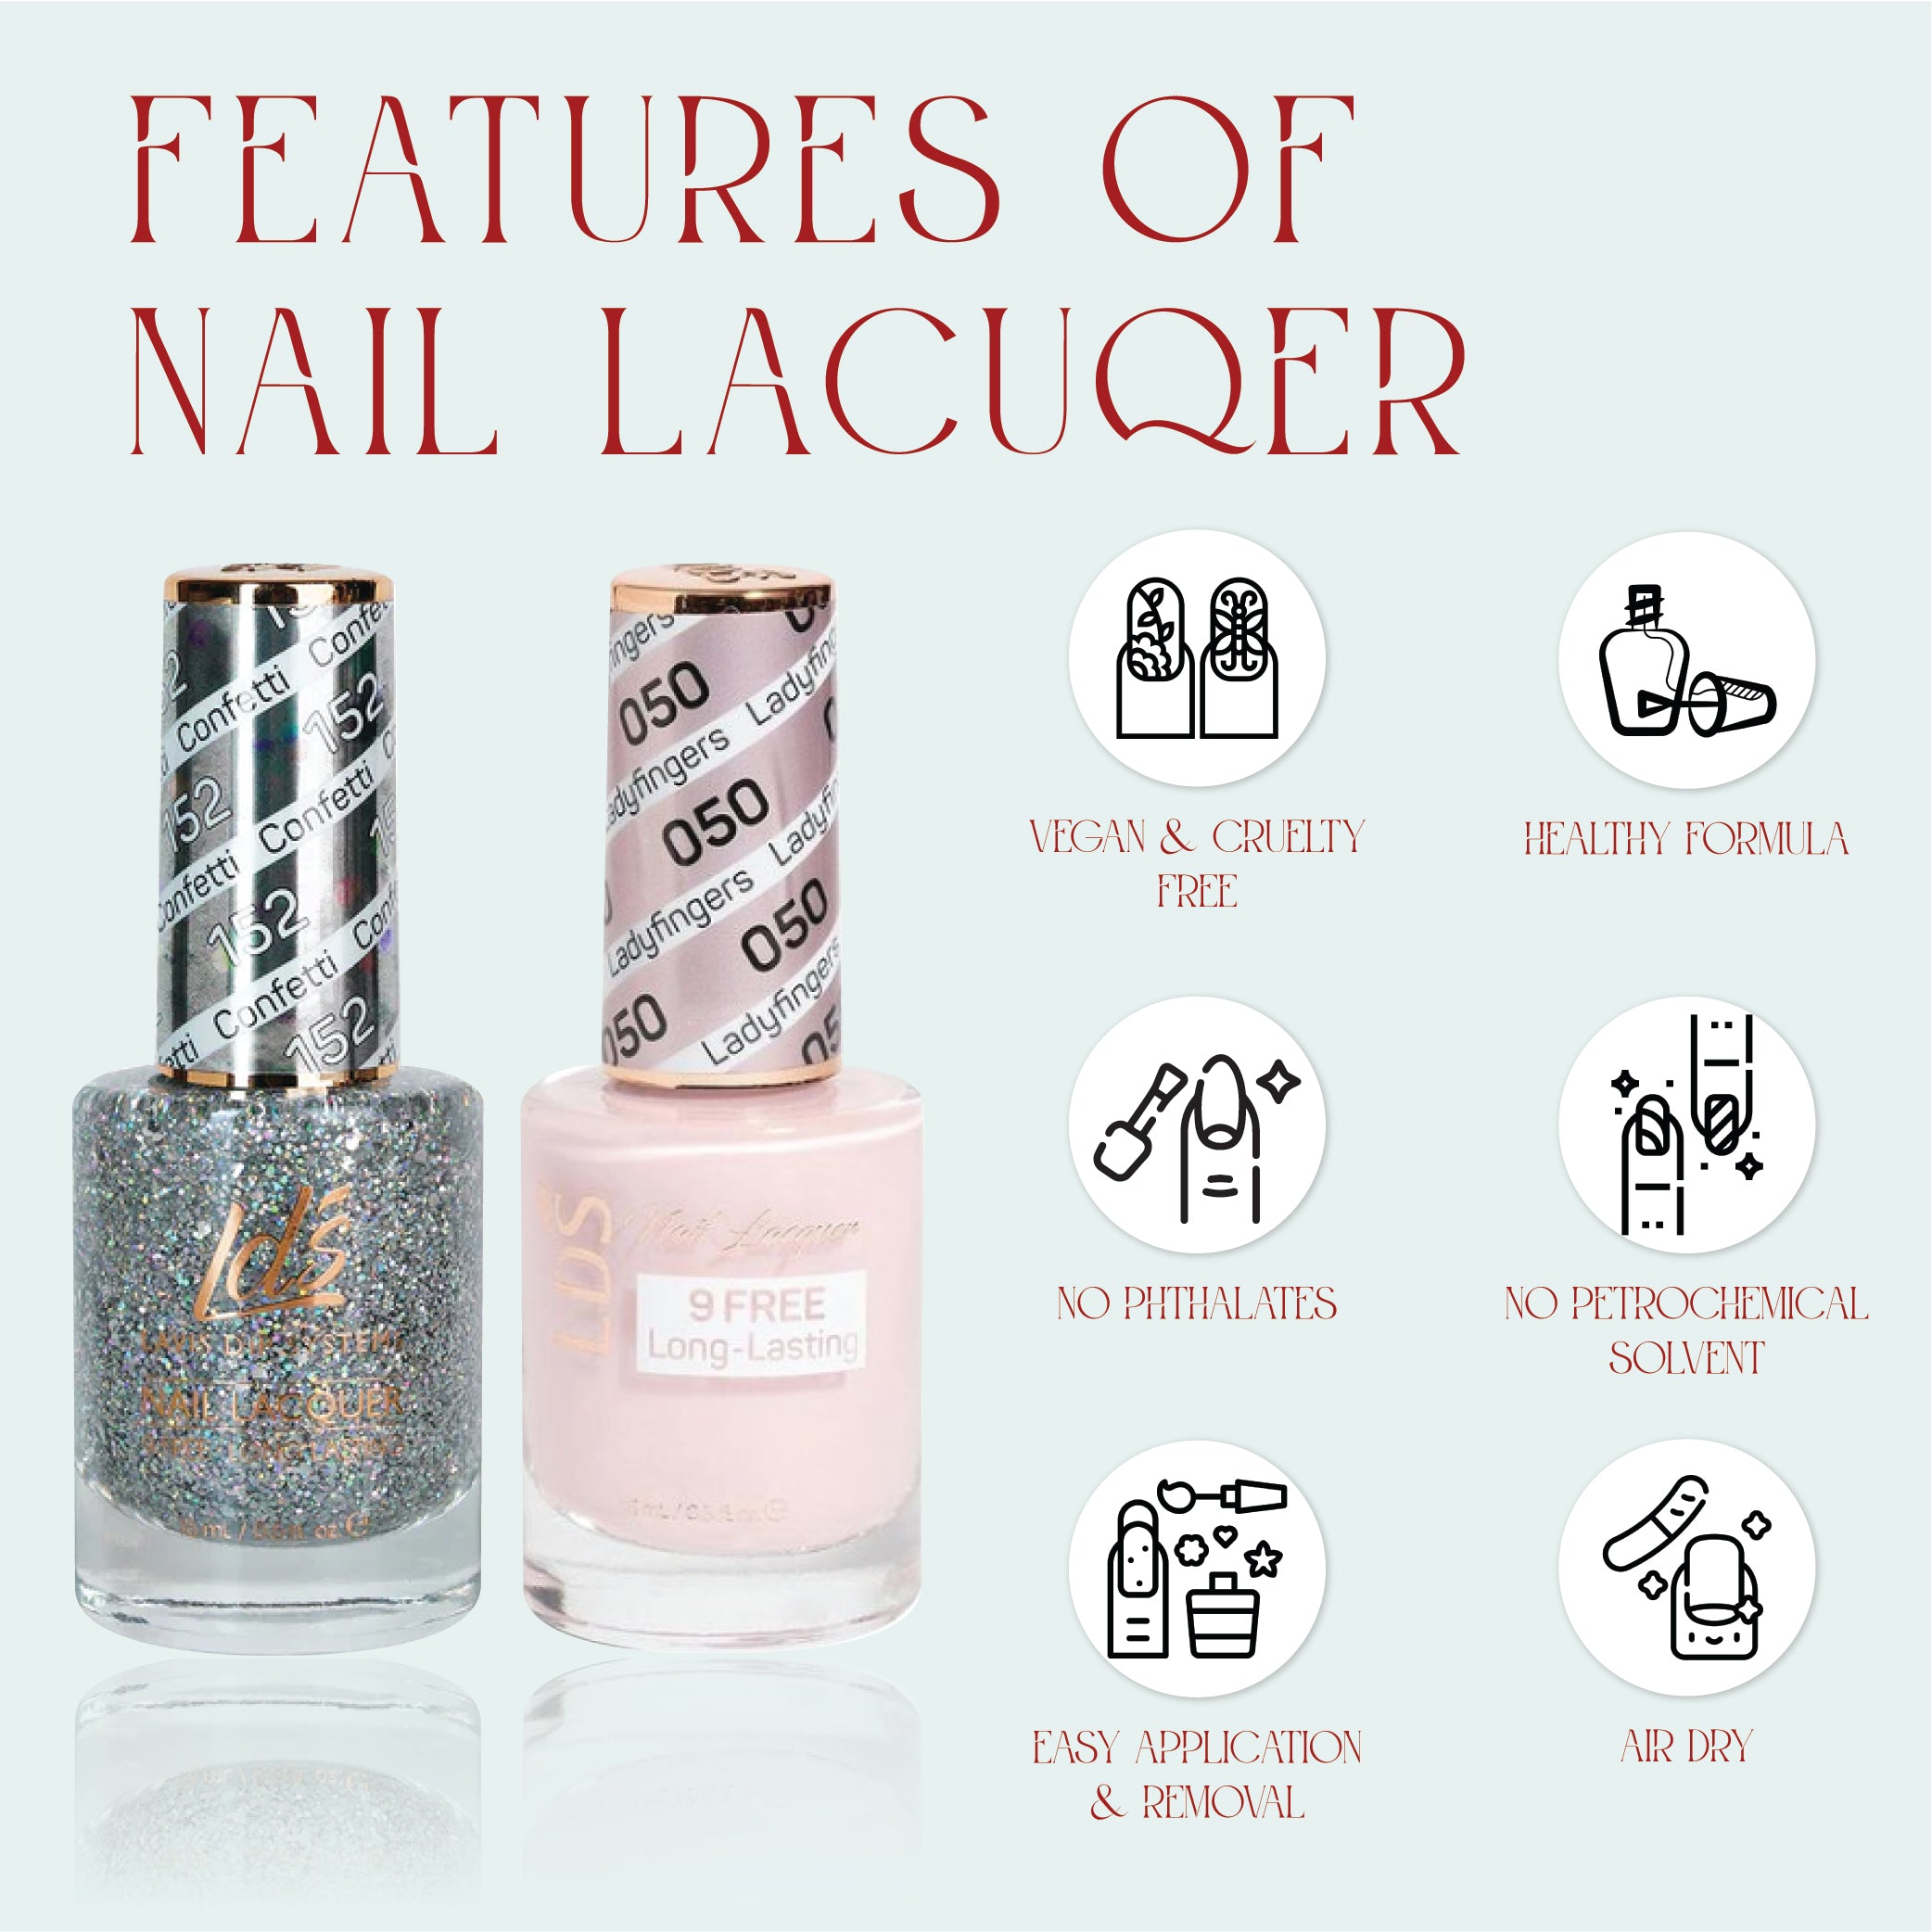 LDS Gel Nail Polish Duo - 066 Coral Colors - Crème Brulee